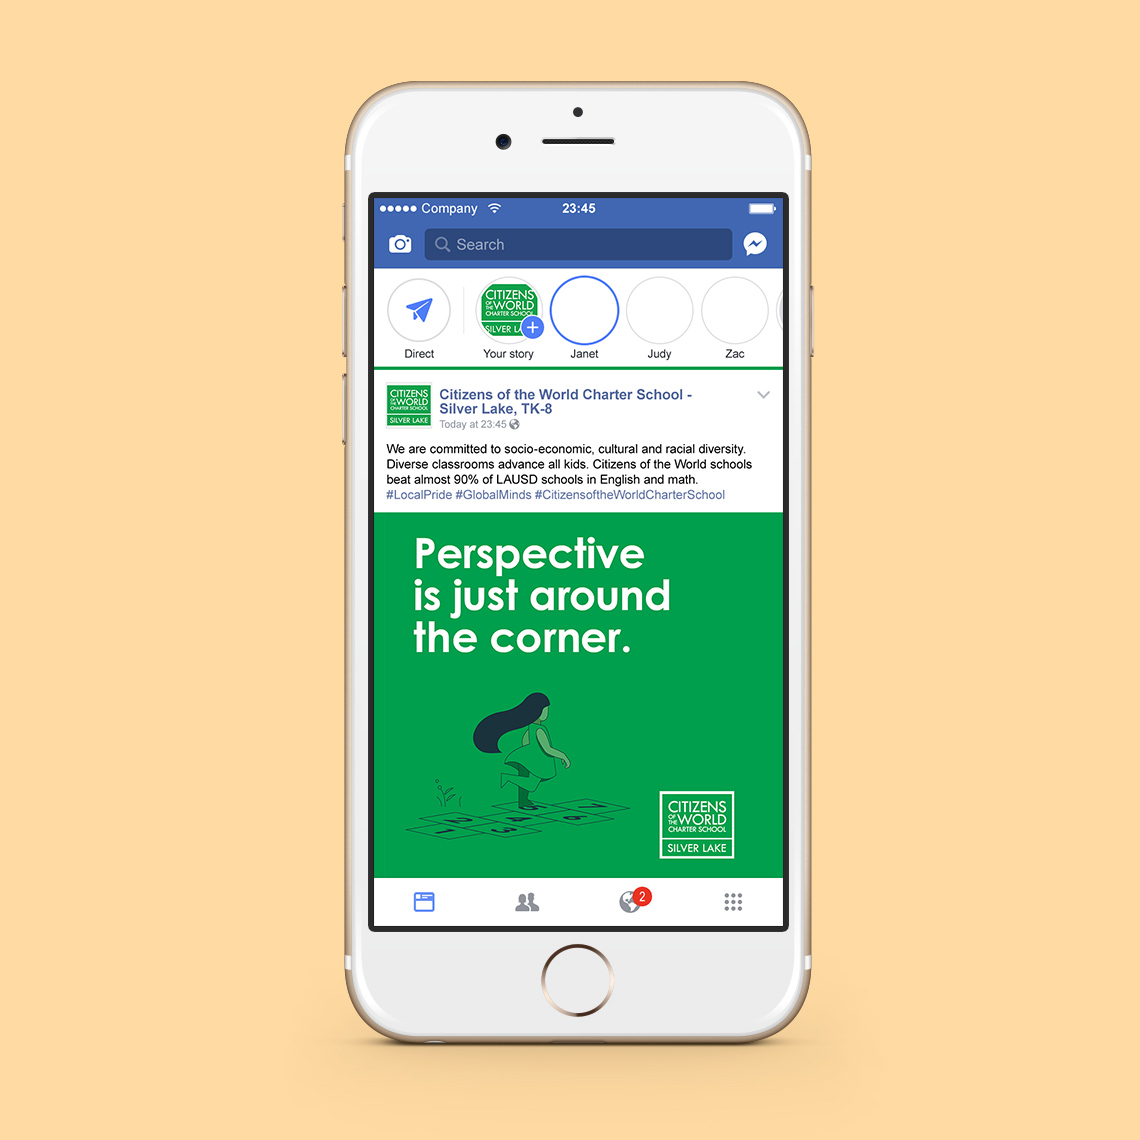 Citizens of the World Mobile Facebook Post Mockup designed by Kilter